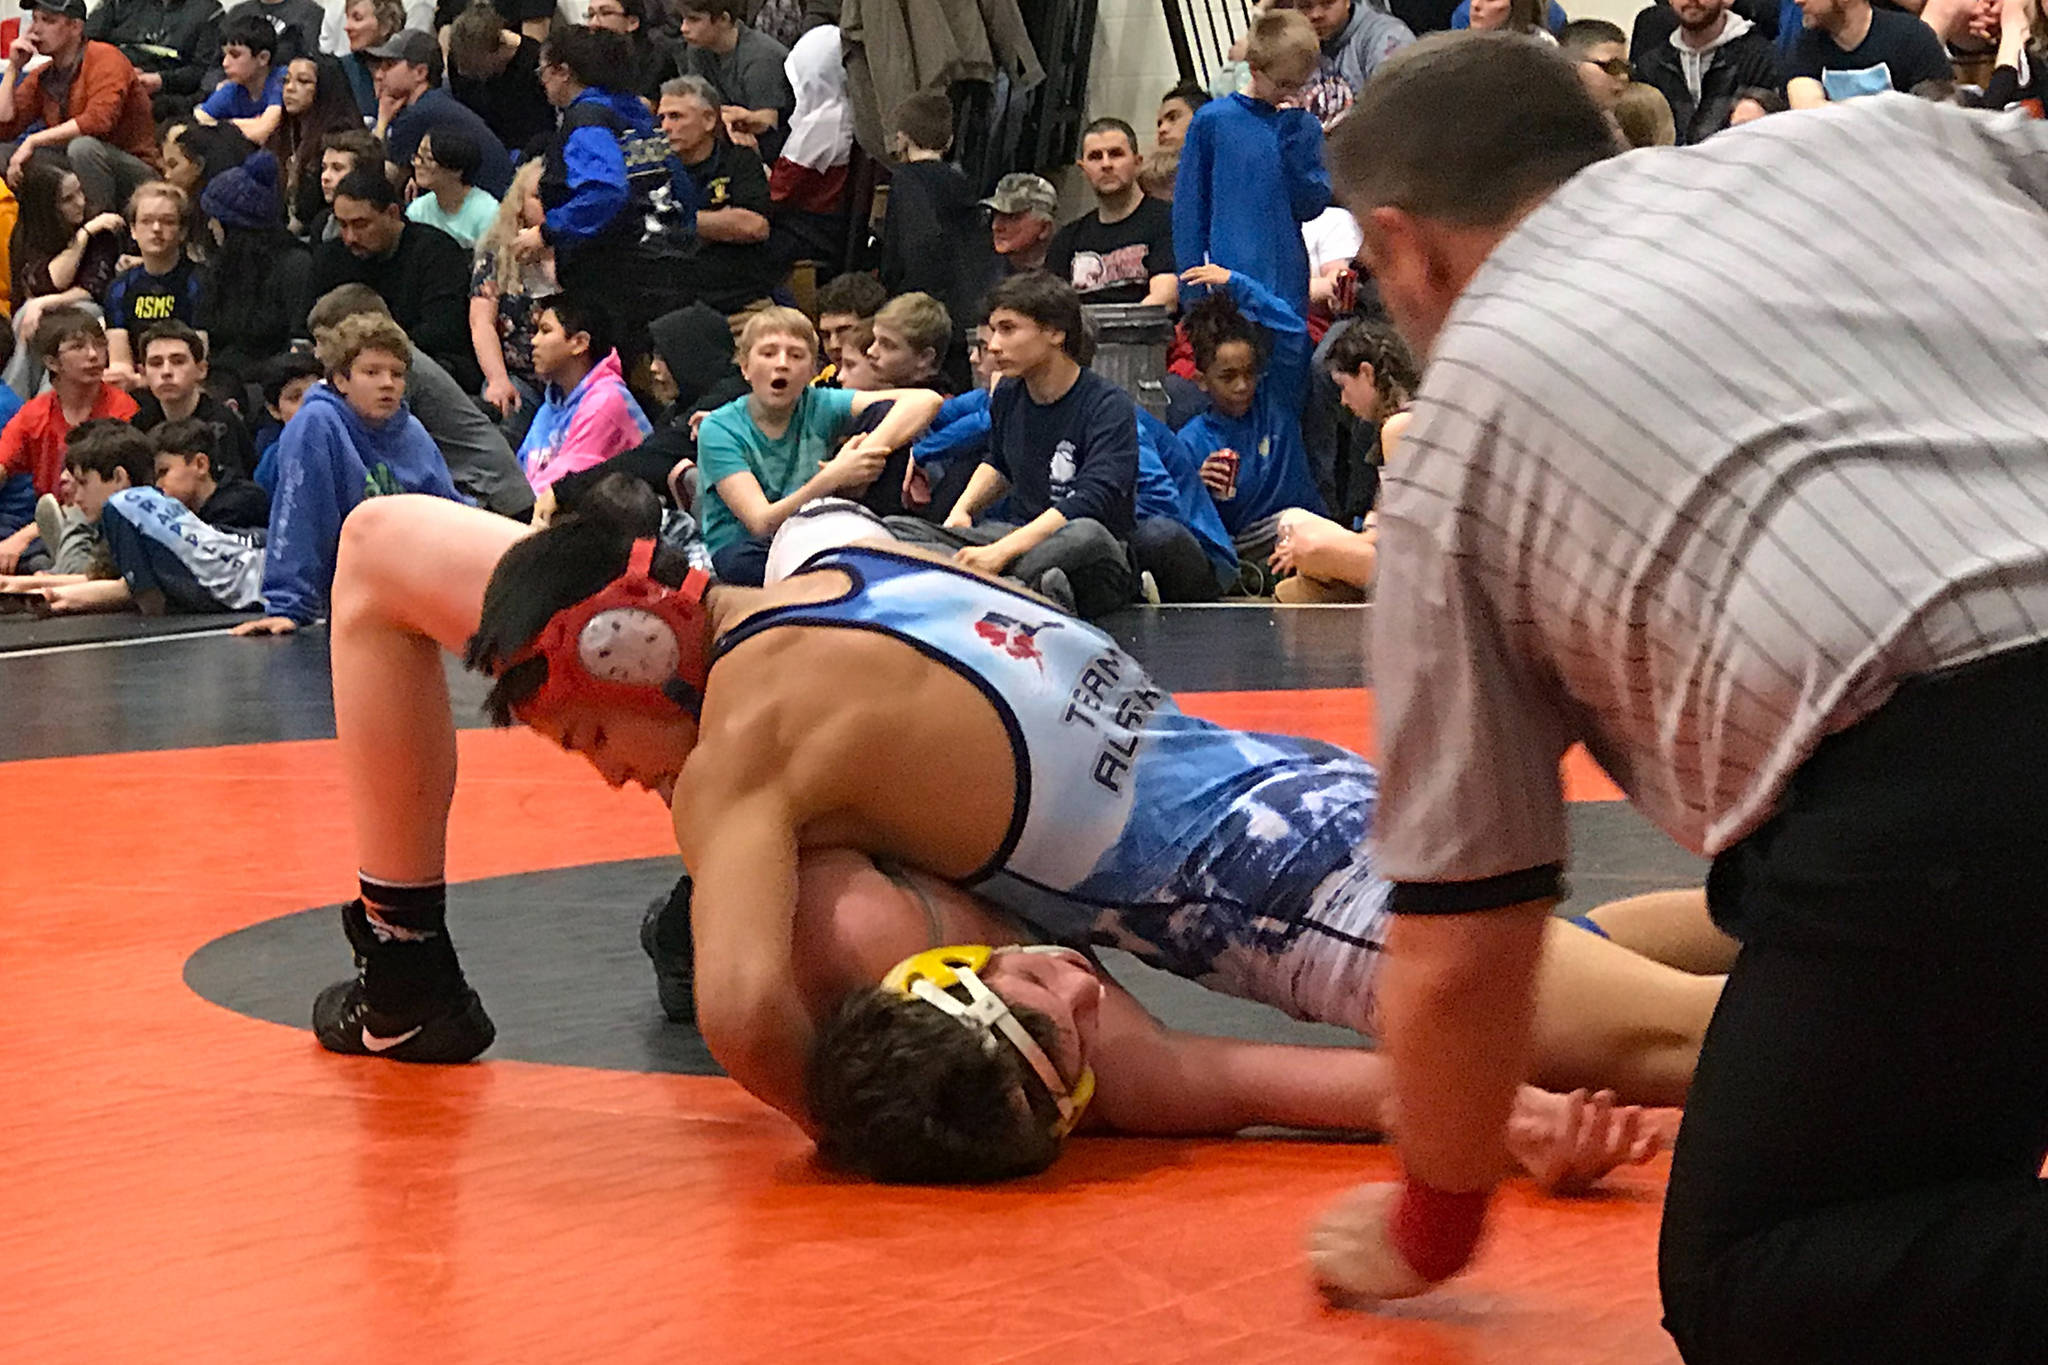 Juneau Tornadoes eighth-grader Jamal Johnson wrestles his way to the 140-pound championship at the Tanana Invitational on Saturday, March 2, 2019. Over 400 wrestlers competed at the two-day meet in Fairbanks. (Courtesy Photo | Summer Baxter/Dana Richards)